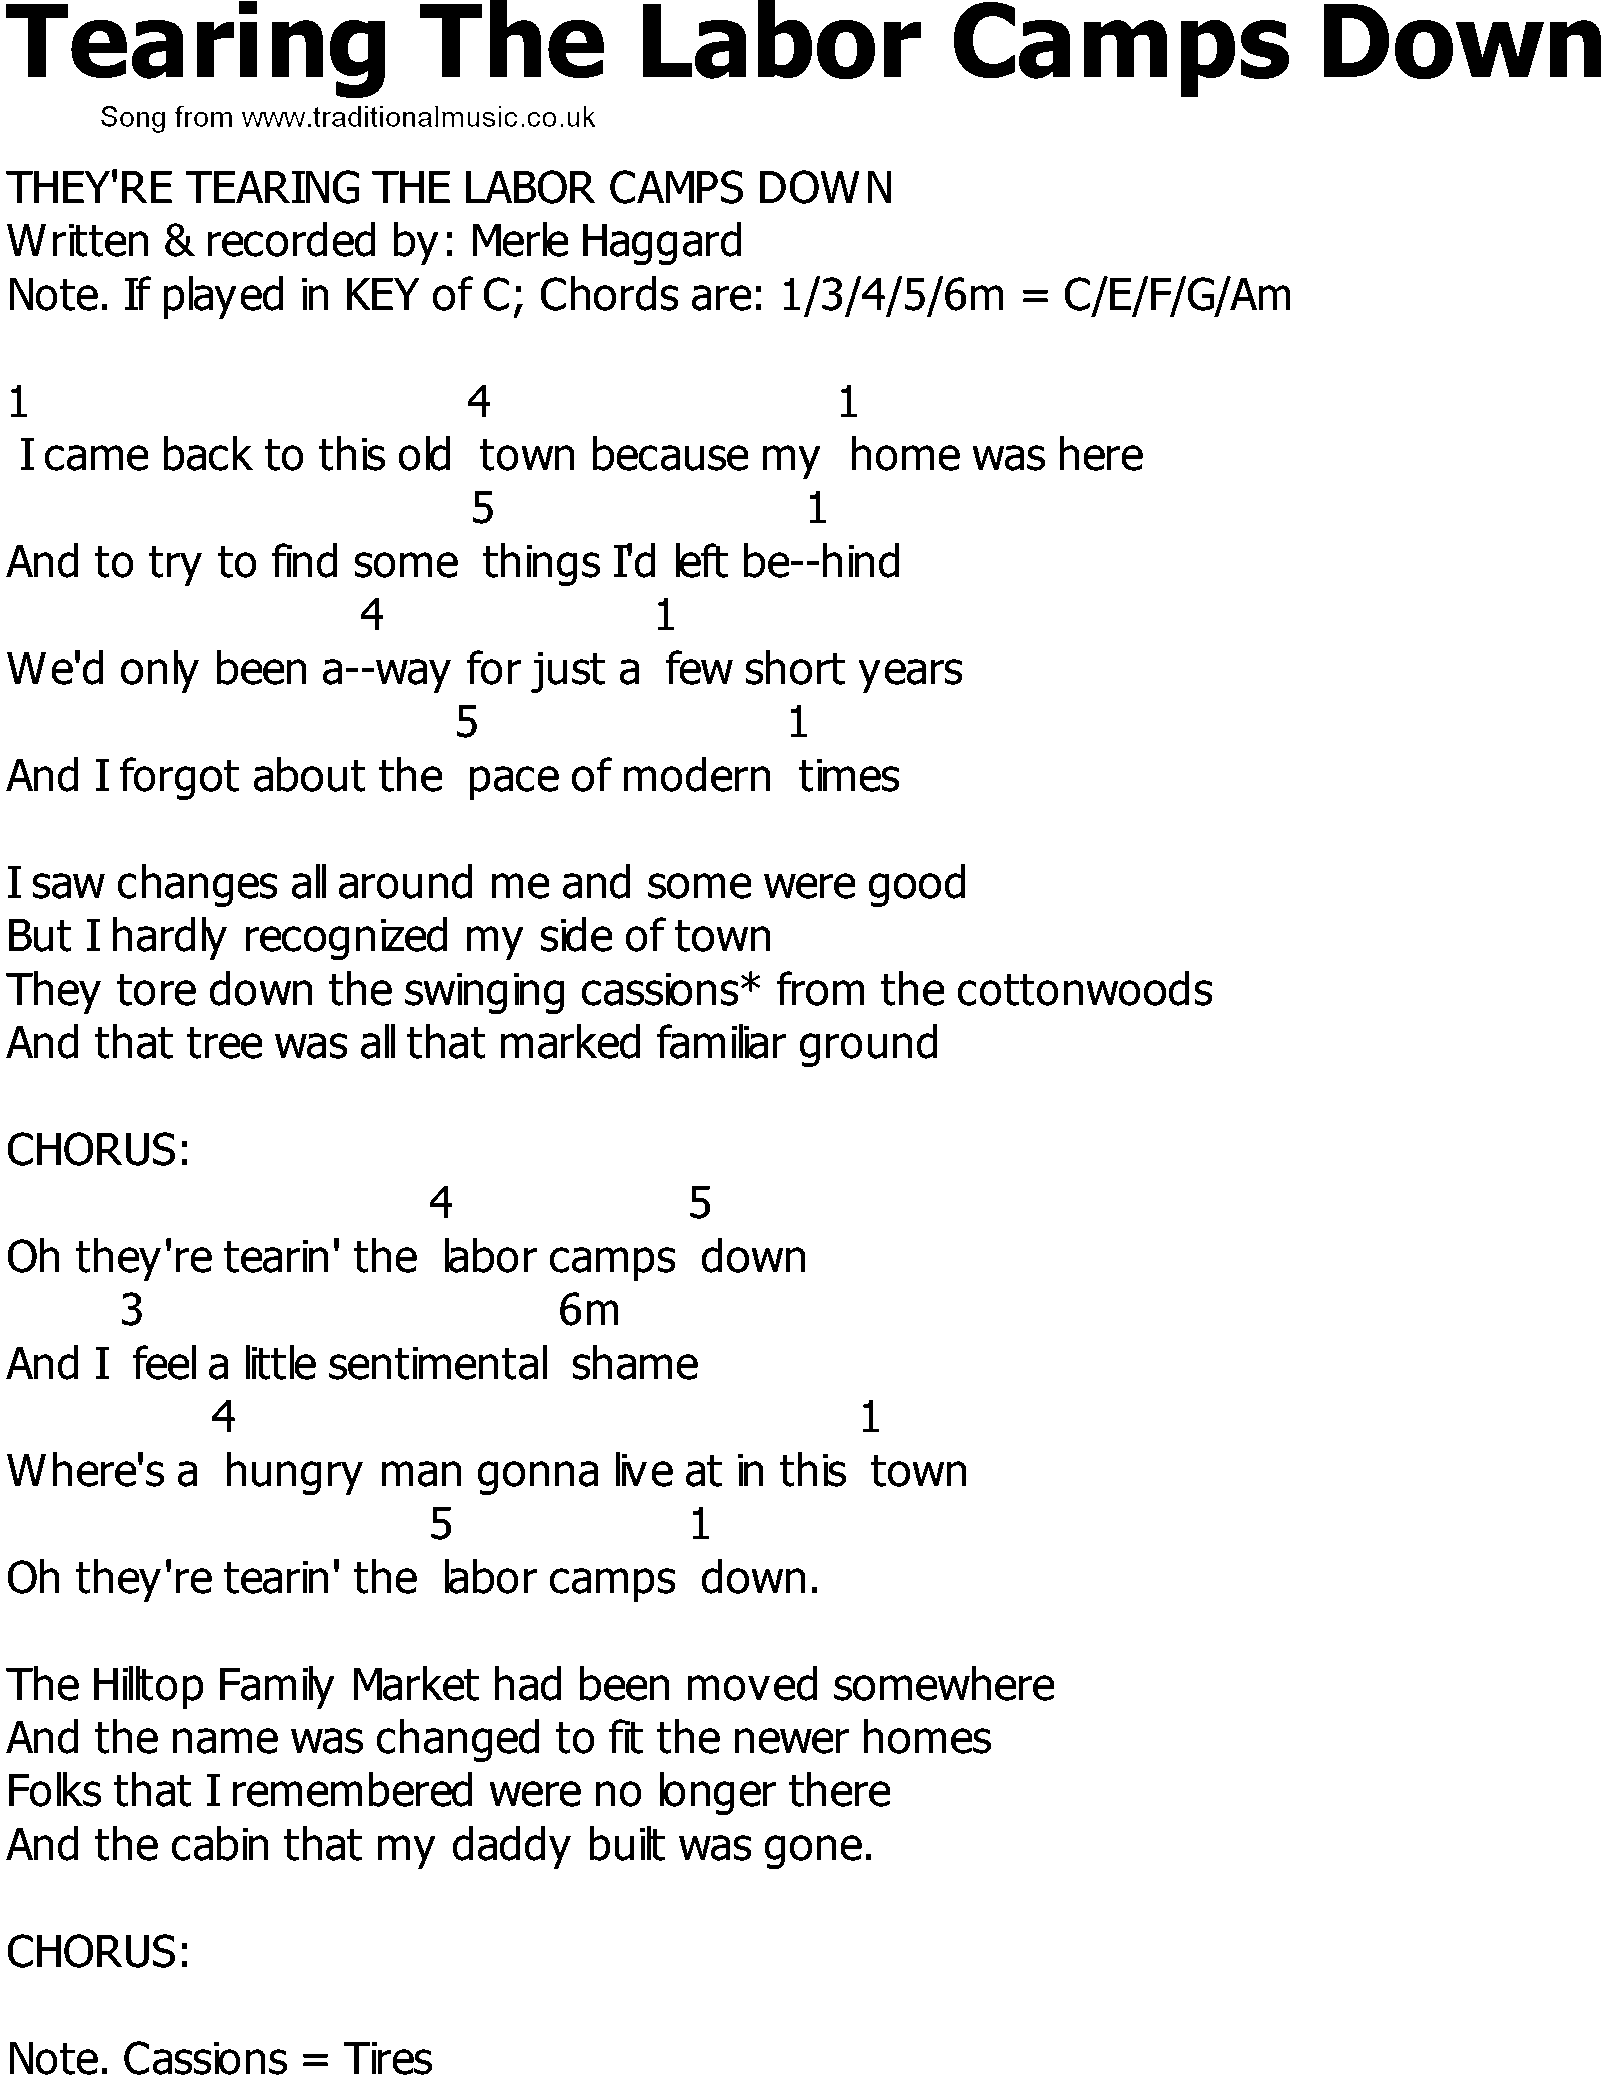 Old Country song lyrics with chords - Tearing The Labor Camps Down